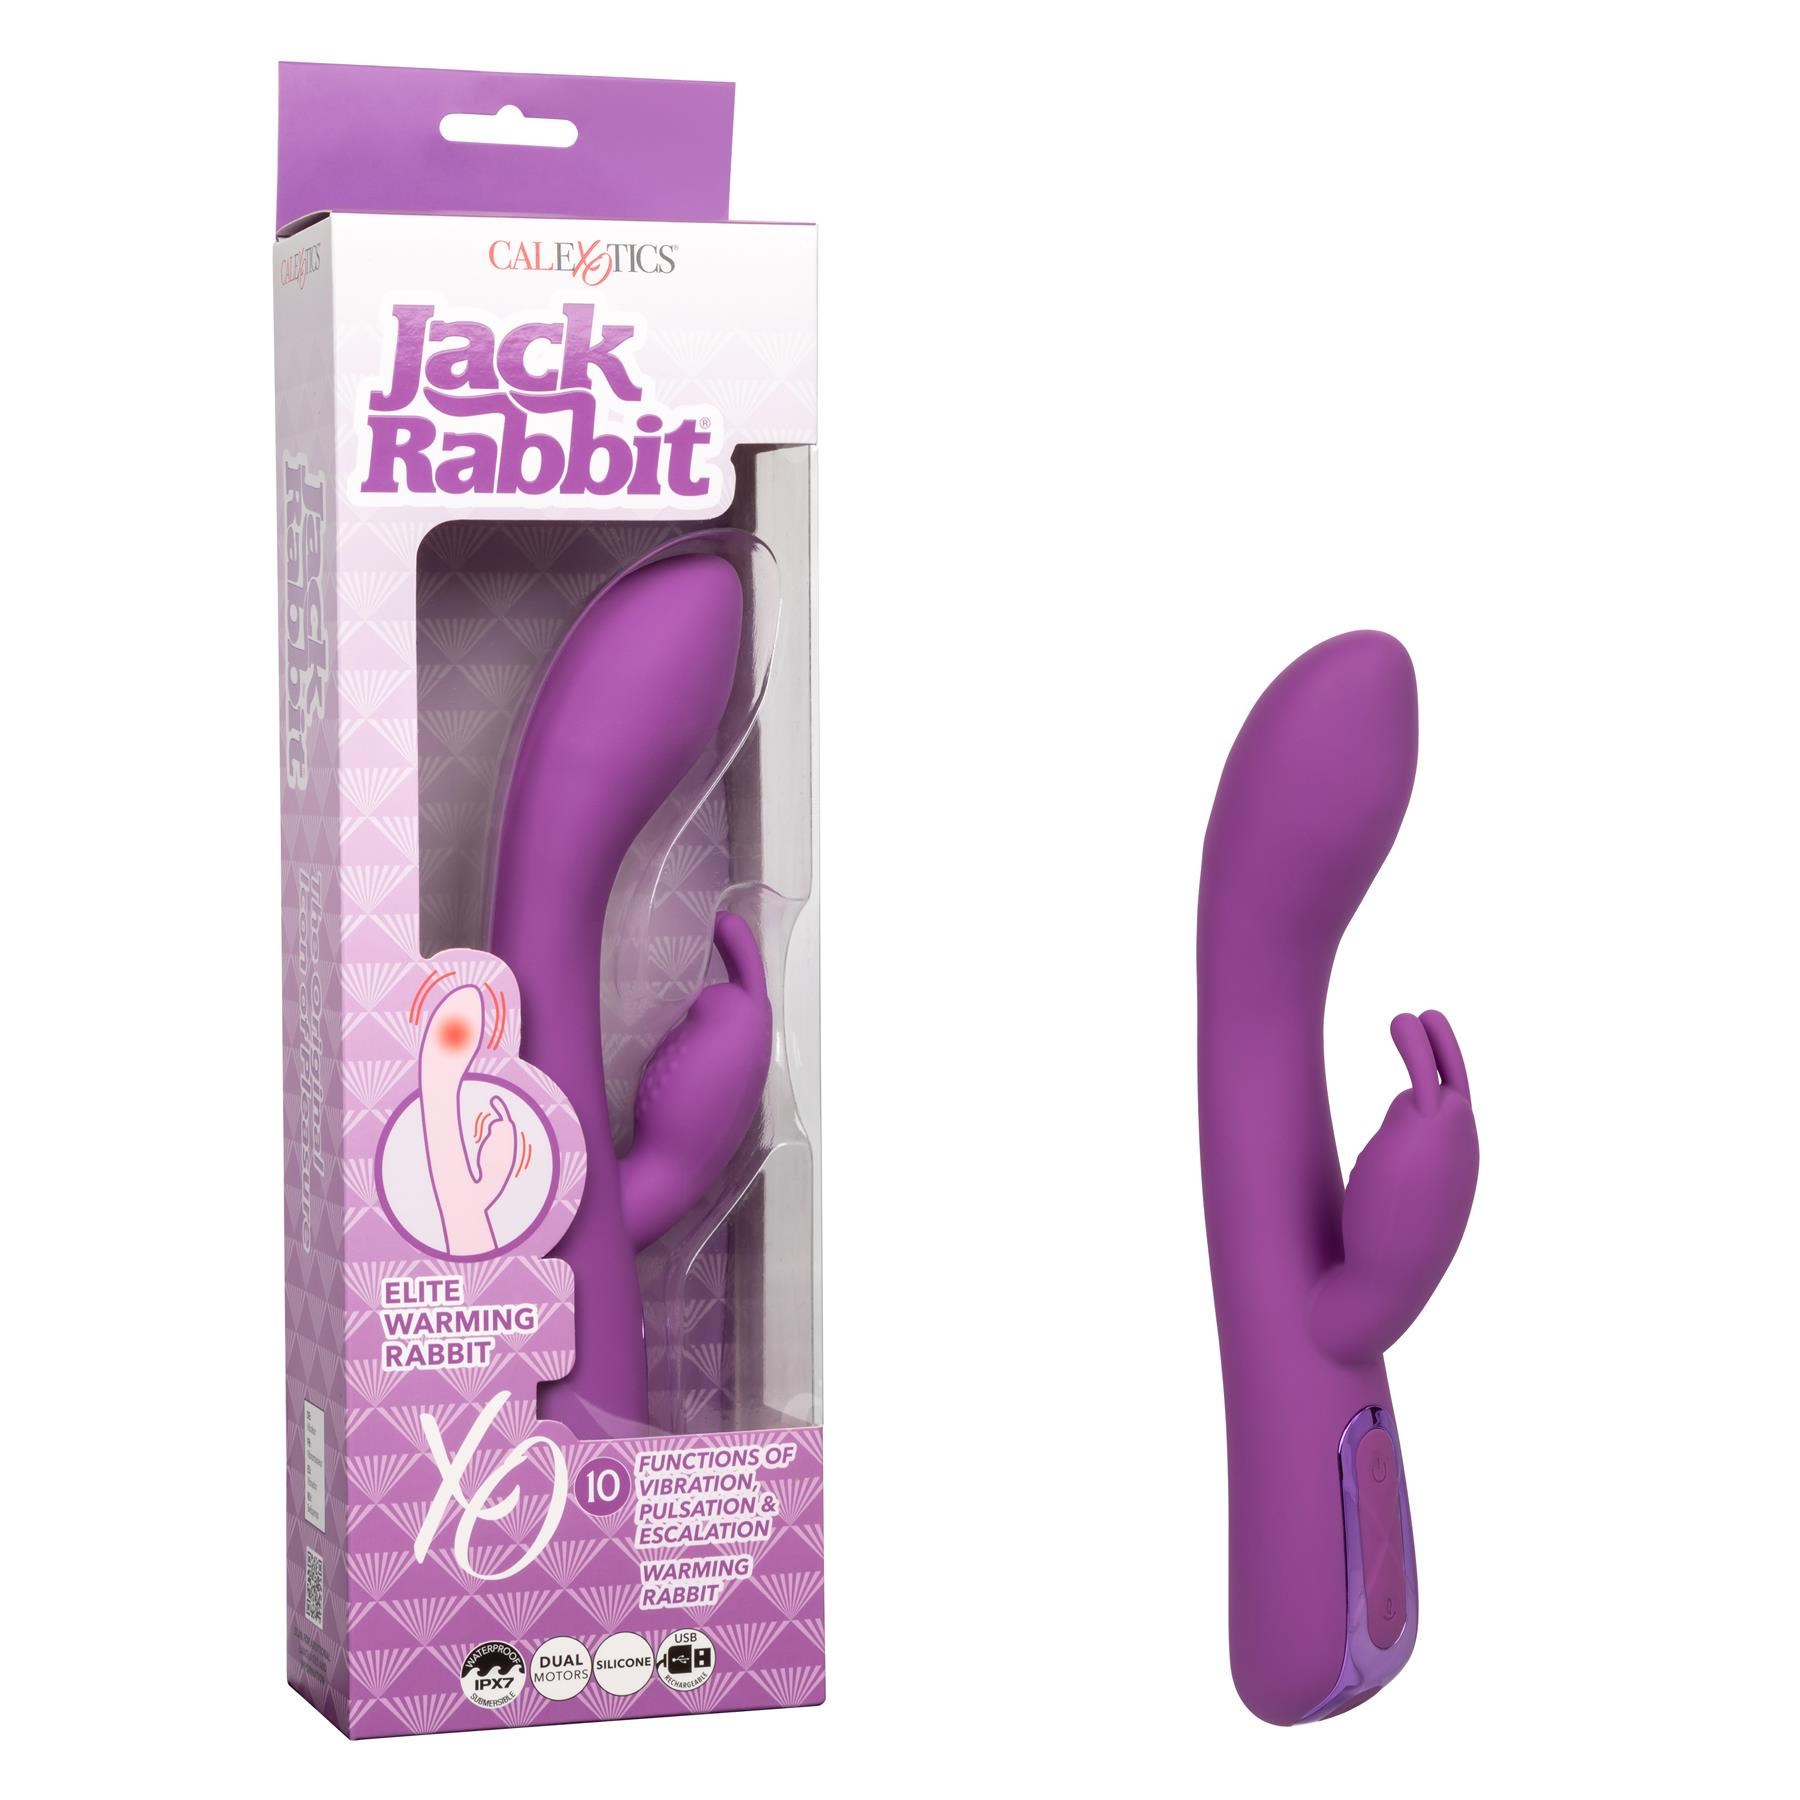 Jack Rabbit Elite Warming Rabbit- Product and Packaging